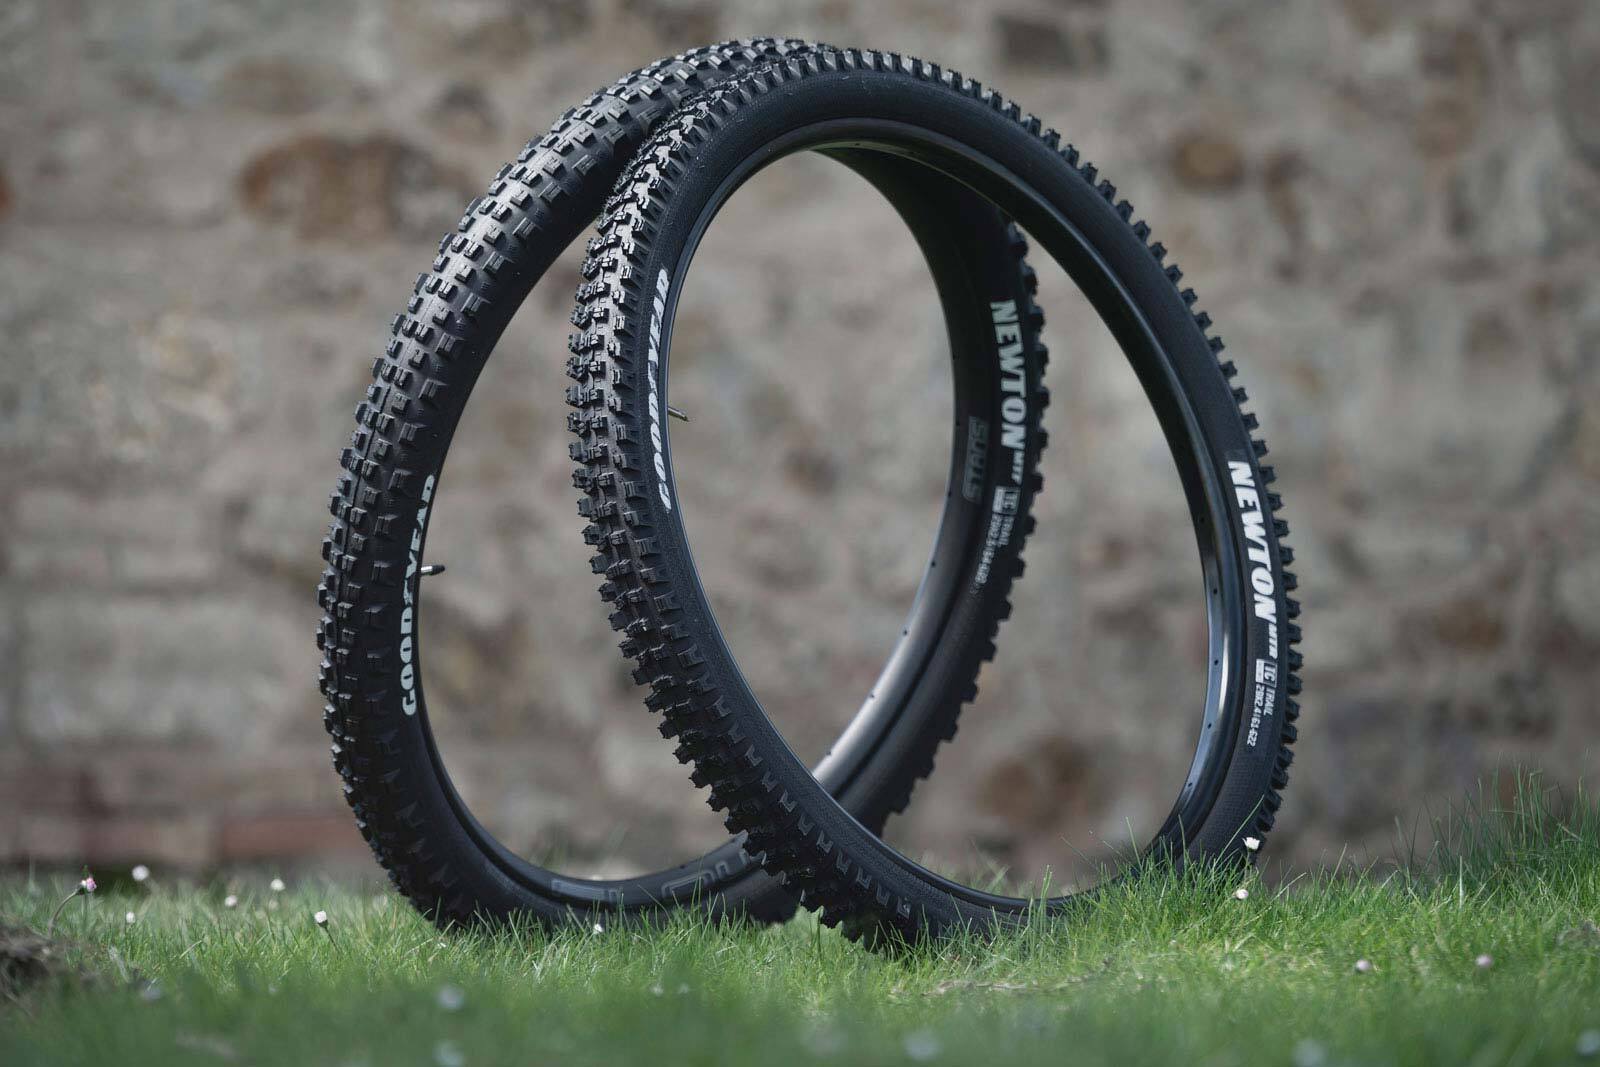 Goodyear Newton MTF MTR MTB Tires leaning against one another